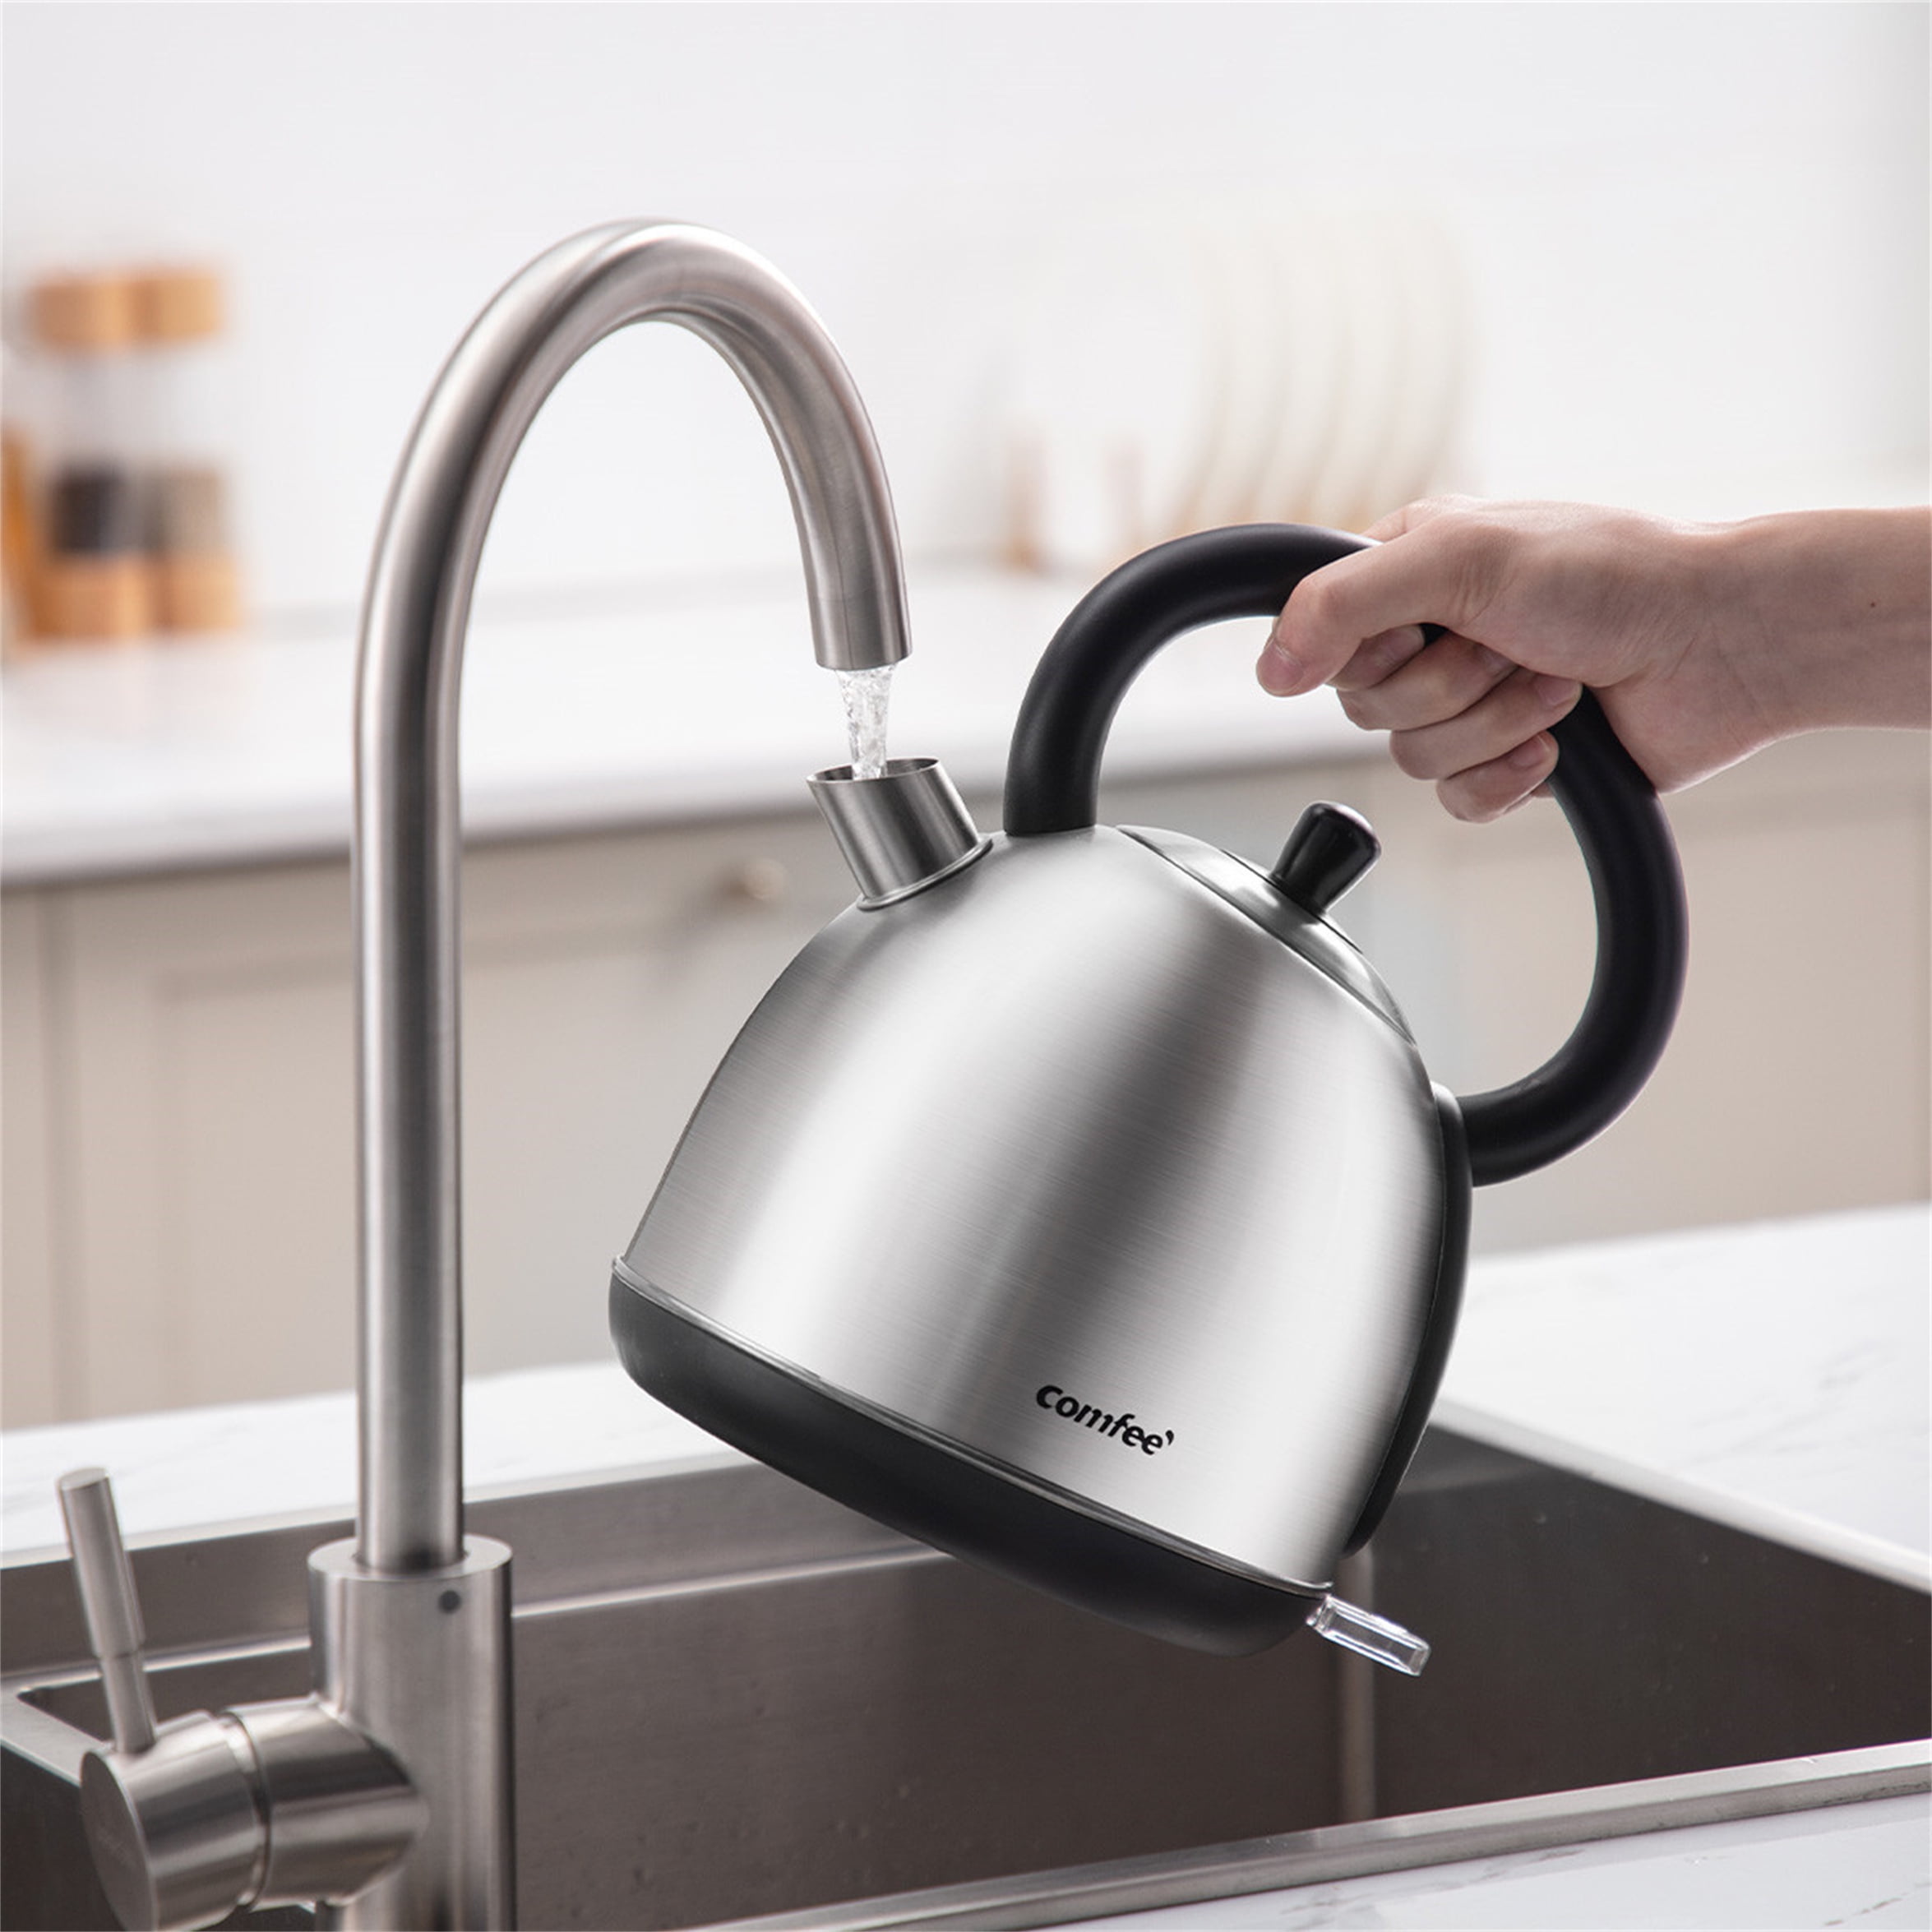 Comfee 1.7L Stainless Steel Electric Kettle Cordless - New - Fast Shipping!